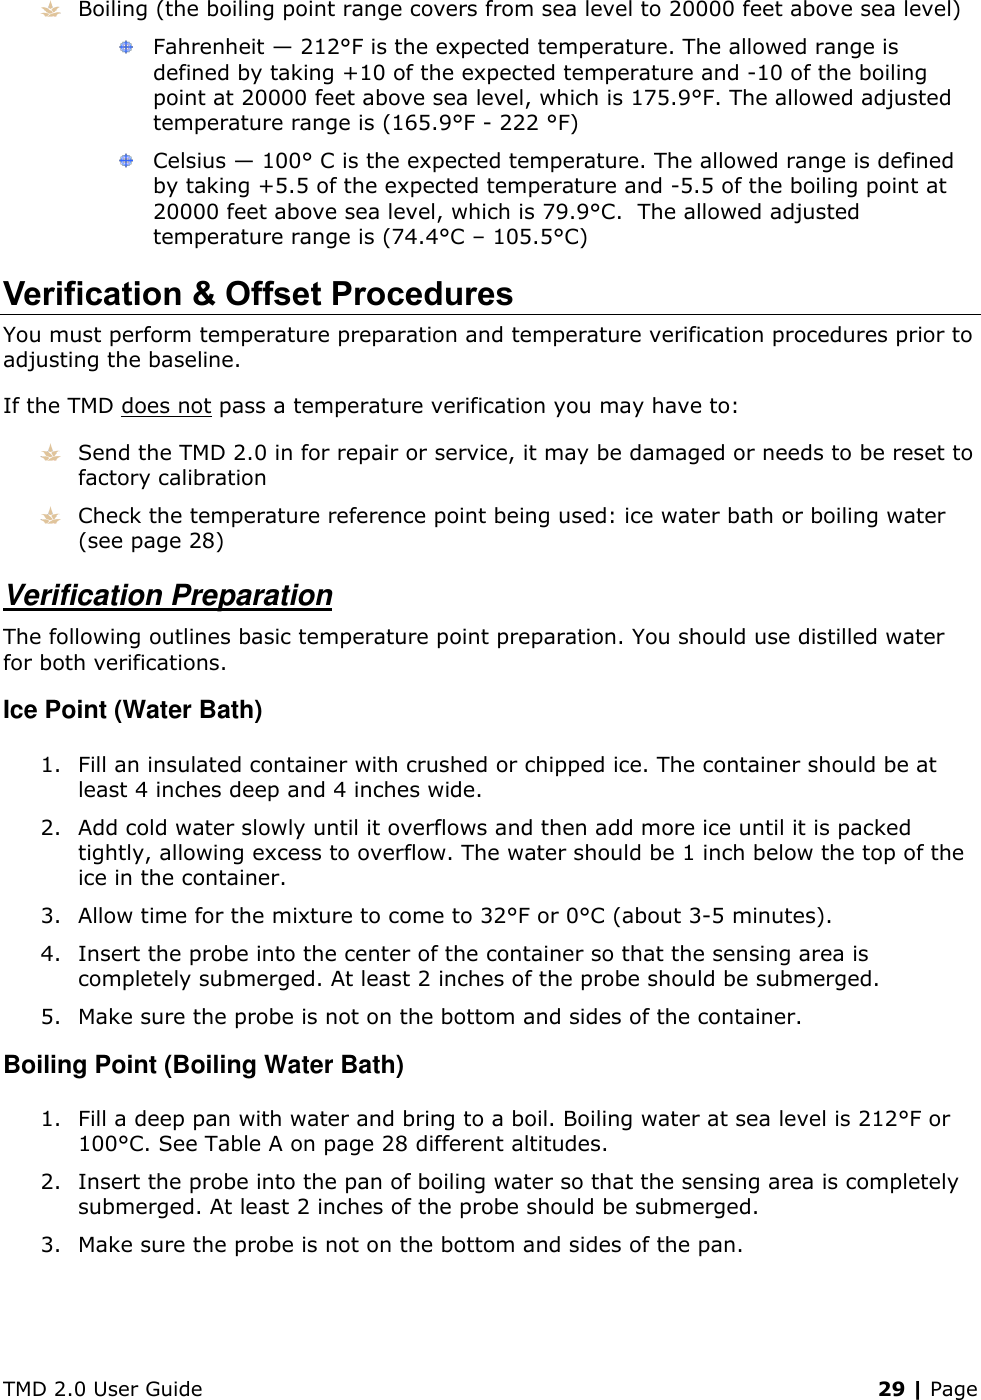 TMD 2.0 User Guide    29 | Page  Boiling (the boiling point range covers from sea level to 20000 feet above sea level)  Fahrenheit — 212°F is the expected temperature. The allowed range is defined by taking +10 of the expected temperature and -10 of the boiling point at 20000 feet above sea level, which is 175.9°F. The allowed adjusted temperature range is (165.9°F - 222 °F)  Celsius — 100° C is the expected temperature. The allowed range is defined by taking +5.5 of the expected temperature and -5.5 of the boiling point at 20000 feet above sea level, which is 79.9°C.  The allowed adjusted temperature range is (74.4°C – 105.5°C) Verification &amp; Offset Procedures You must perform temperature preparation and temperature verification procedures prior to adjusting the baseline. If the TMD does not pass a temperature verification you may have to:  Send the TMD 2.0 in for repair or service, it may be damaged or needs to be reset to factory calibration  Check the temperature reference point being used: ice water bath or boiling water (see page 28) Verification Preparation The following outlines basic temperature point preparation. You should use distilled water for both verifications. Ice Point (Water Bath) 1. Fill an insulated container with crushed or chipped ice. The container should be at least 4 inches deep and 4 inches wide. 2. Add cold water slowly until it overflows and then add more ice until it is packed tightly, allowing excess to overflow. The water should be 1 inch below the top of the ice in the container. 3. Allow time for the mixture to come to 32°F or 0°C (about 3-5 minutes).  4. Insert the probe into the center of the container so that the sensing area is completely submerged. At least 2 inches of the probe should be submerged. 5. Make sure the probe is not on the bottom and sides of the container. Boiling Point (Boiling Water Bath) 1. Fill a deep pan with water and bring to a boil. Boiling water at sea level is 212°F or 100°C. See Table A on page 28 different altitudes. 2. Insert the probe into the pan of boiling water so that the sensing area is completely submerged. At least 2 inches of the probe should be submerged. 3. Make sure the probe is not on the bottom and sides of the pan.    